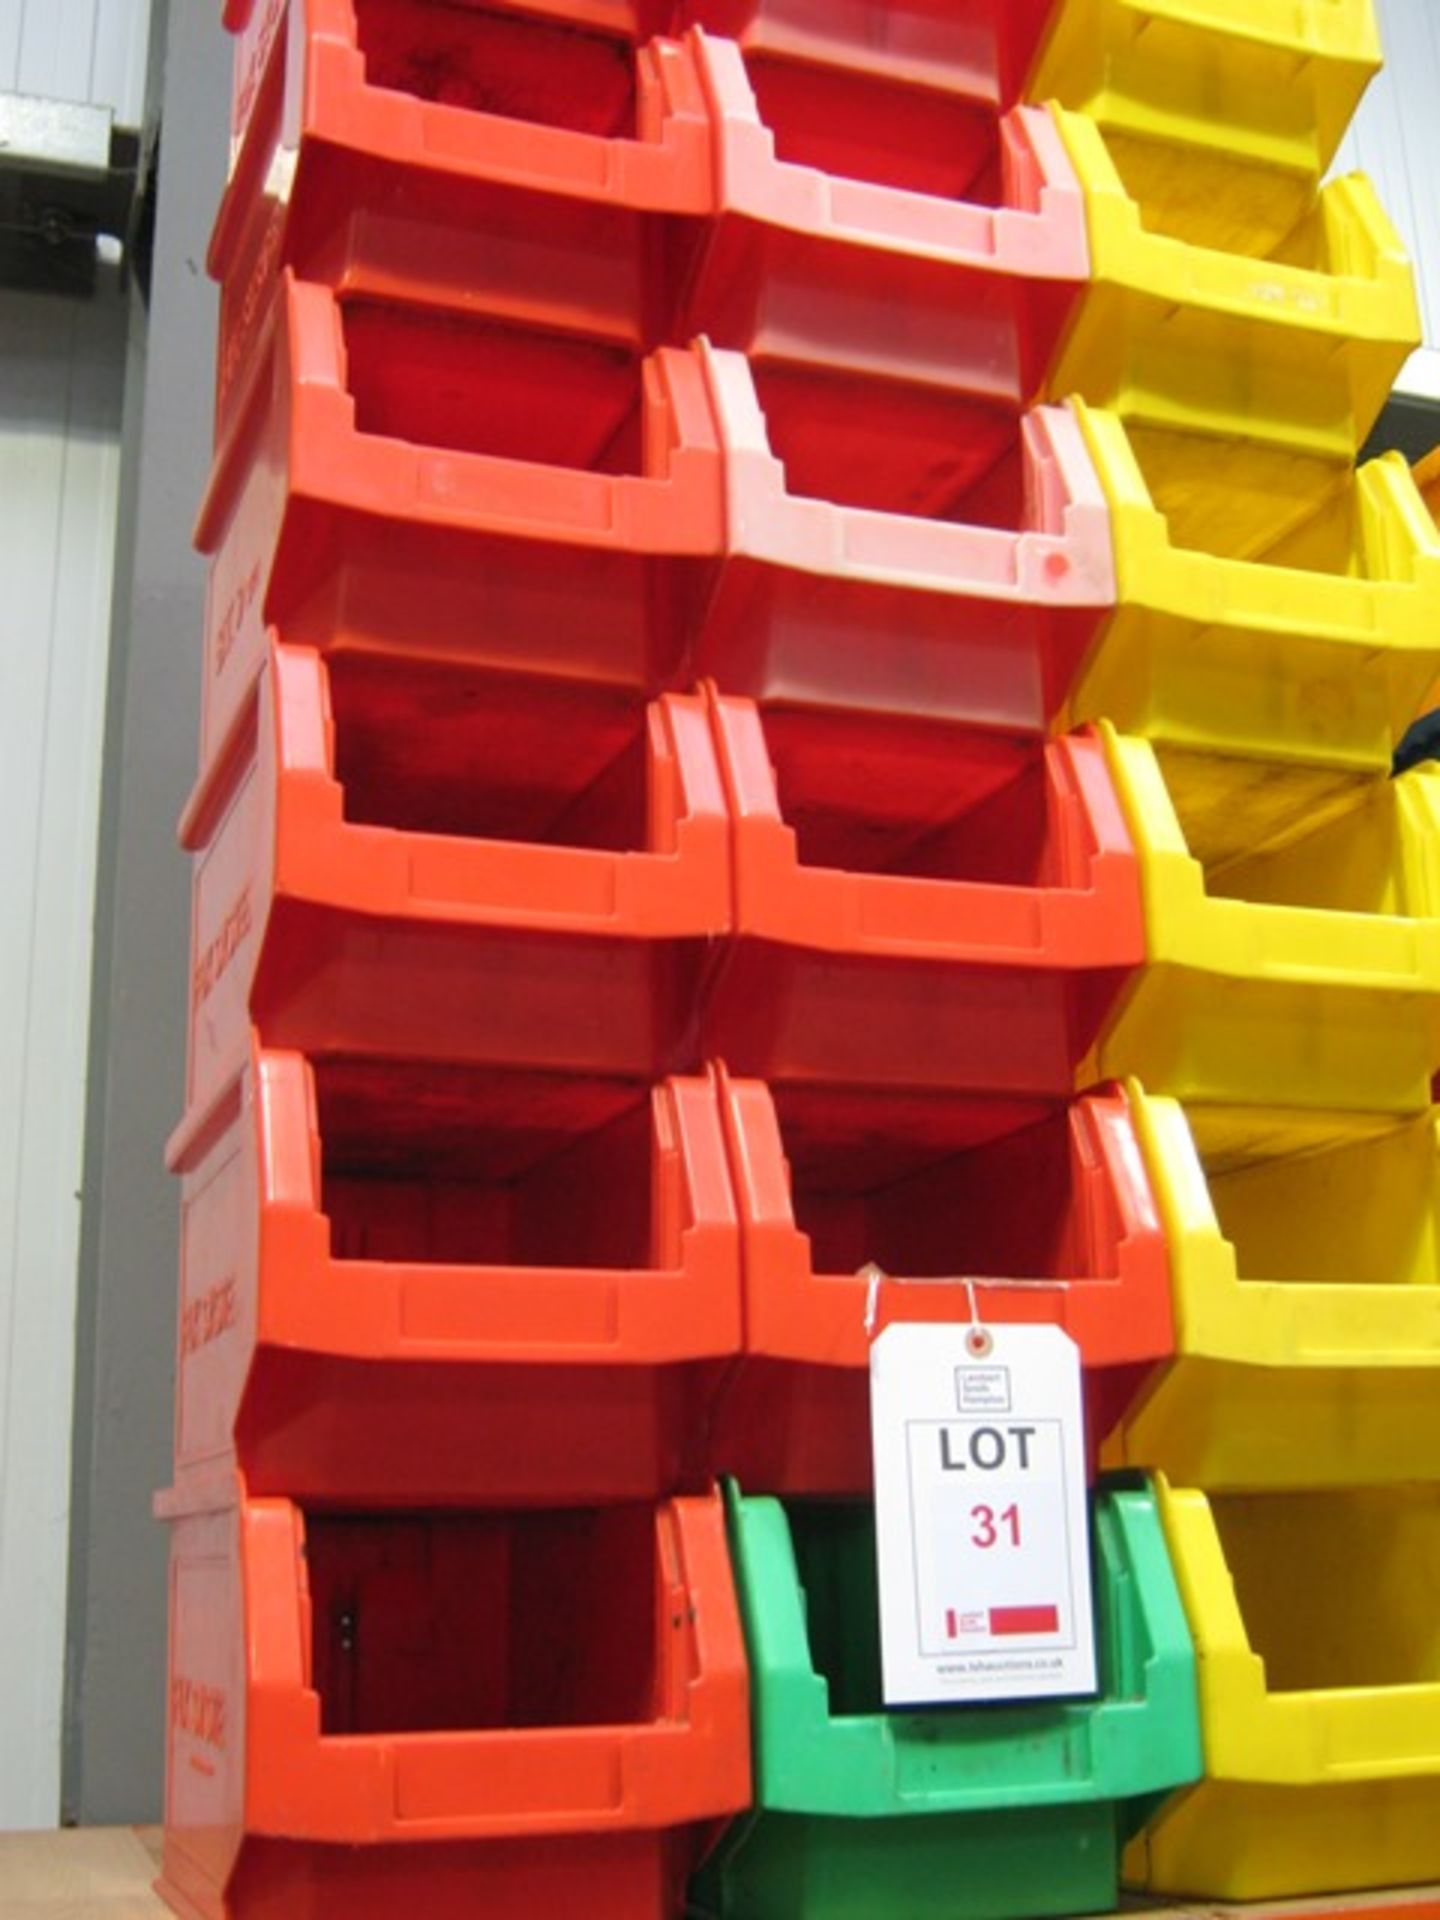 18 x Storage boxes, approx. size width 200mm x depth 300mm x height 170mm